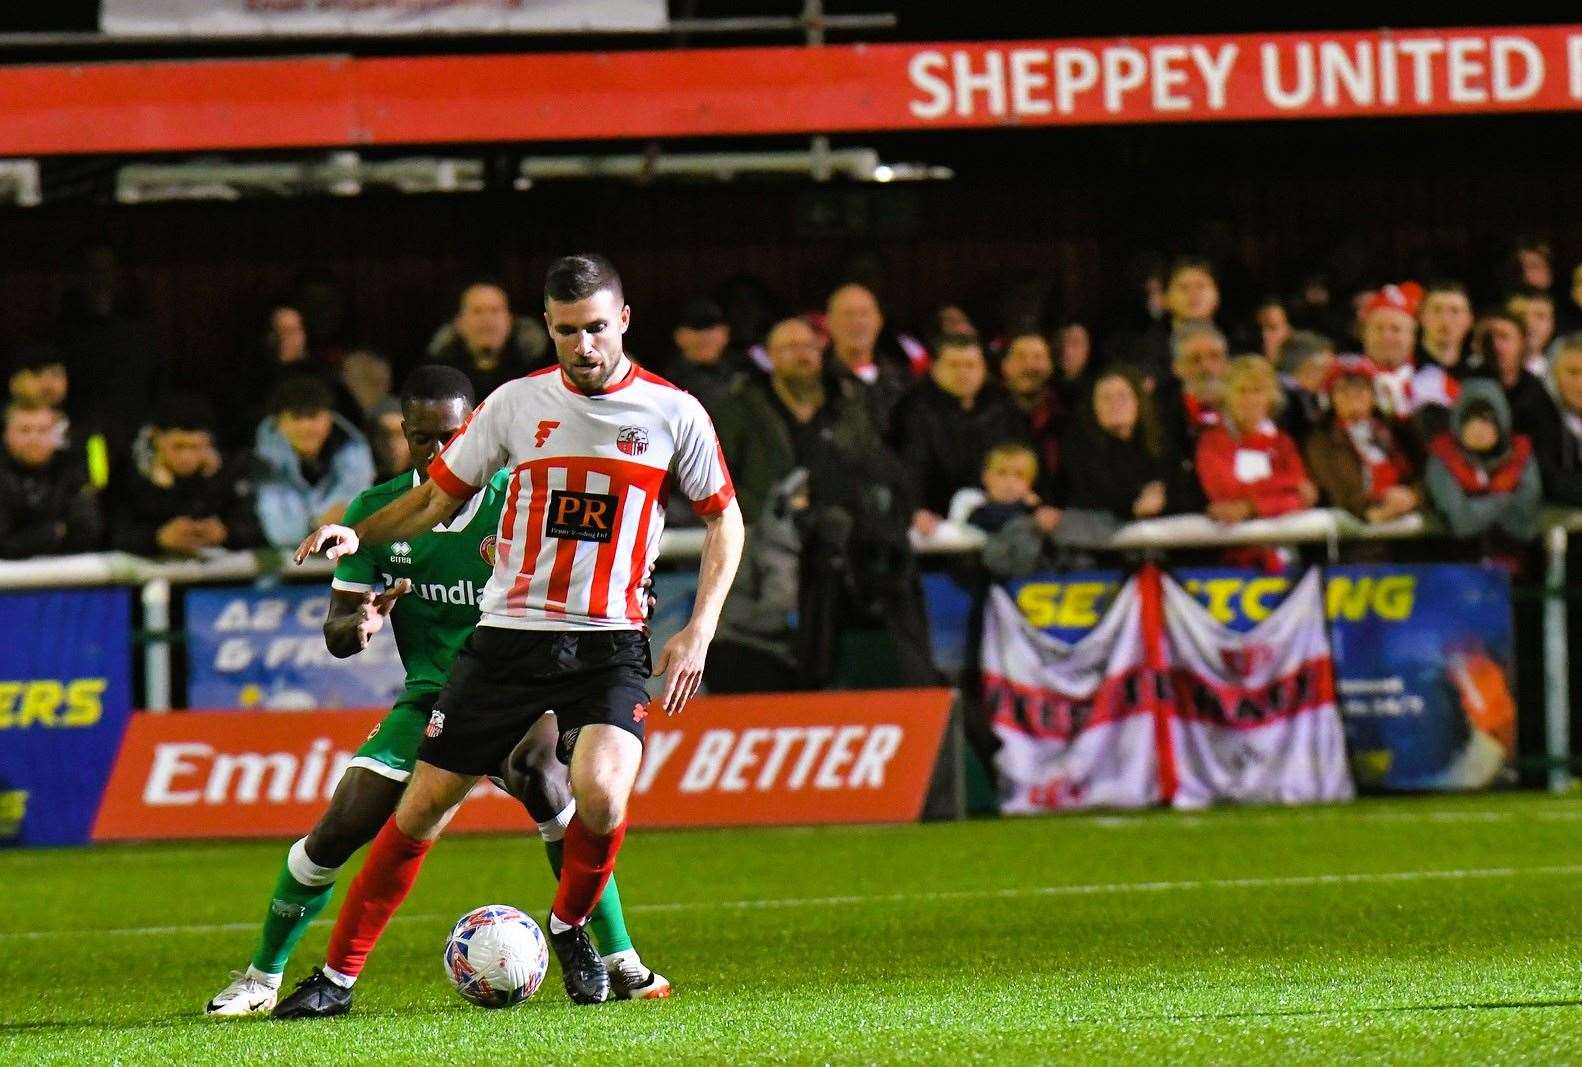 Sheppey winger Danny Leonard last appeared in the FA Cup game against Walsall Picture: Marc Richards